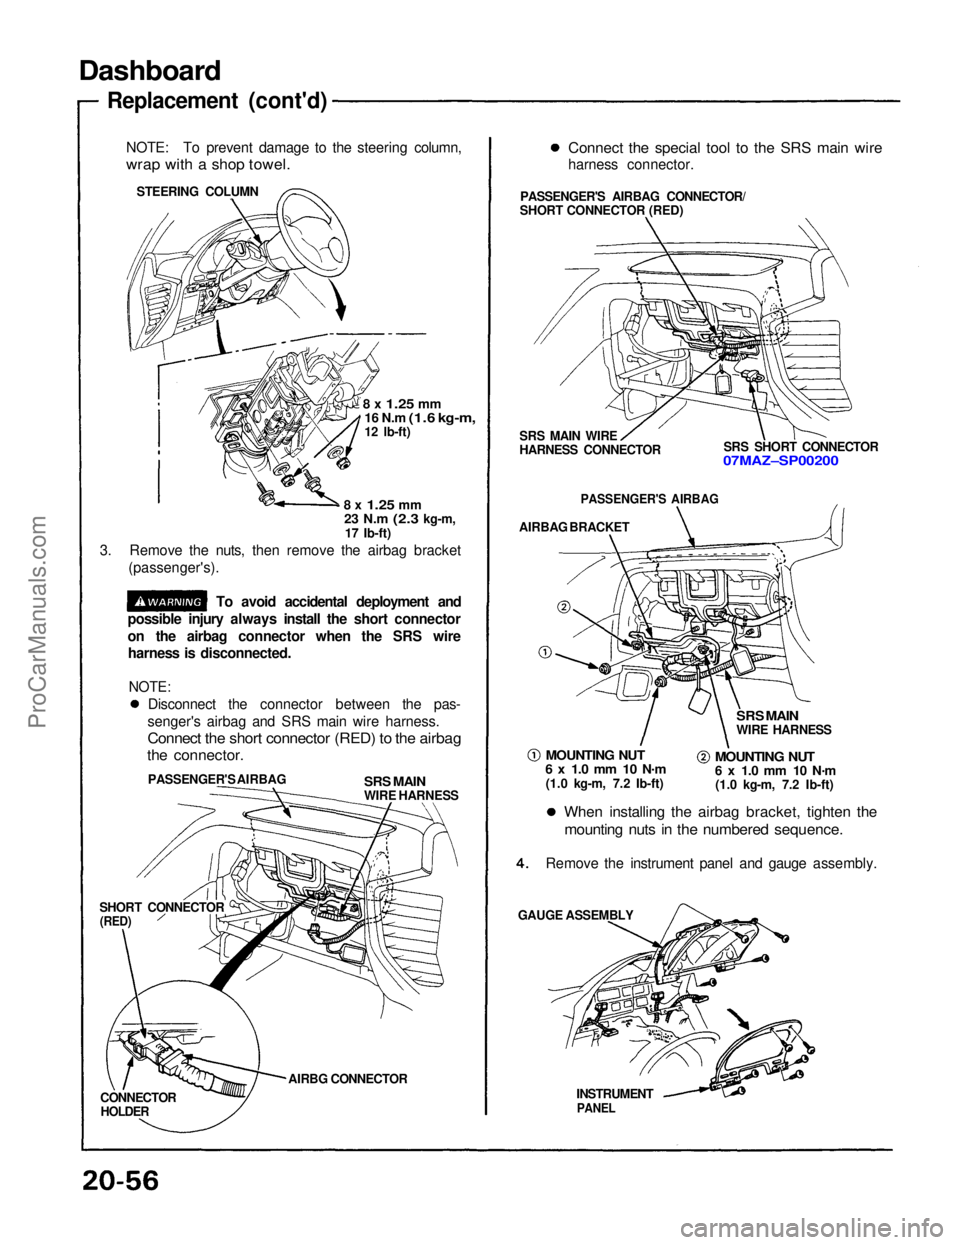 ACURA NSX 1991  Service Repair Manual 
Dashboard

Replacement (cont'd)
NOTE: To prevent damage to the steering column,

wrap with a shop towel.
STEERING COLUMN

8 x
 1.25
 mm
16 N.m
 (1.6 kg-m,

12 lb-ft)

8 x
 1.25
 mm
 23 N.m
 (2.3
